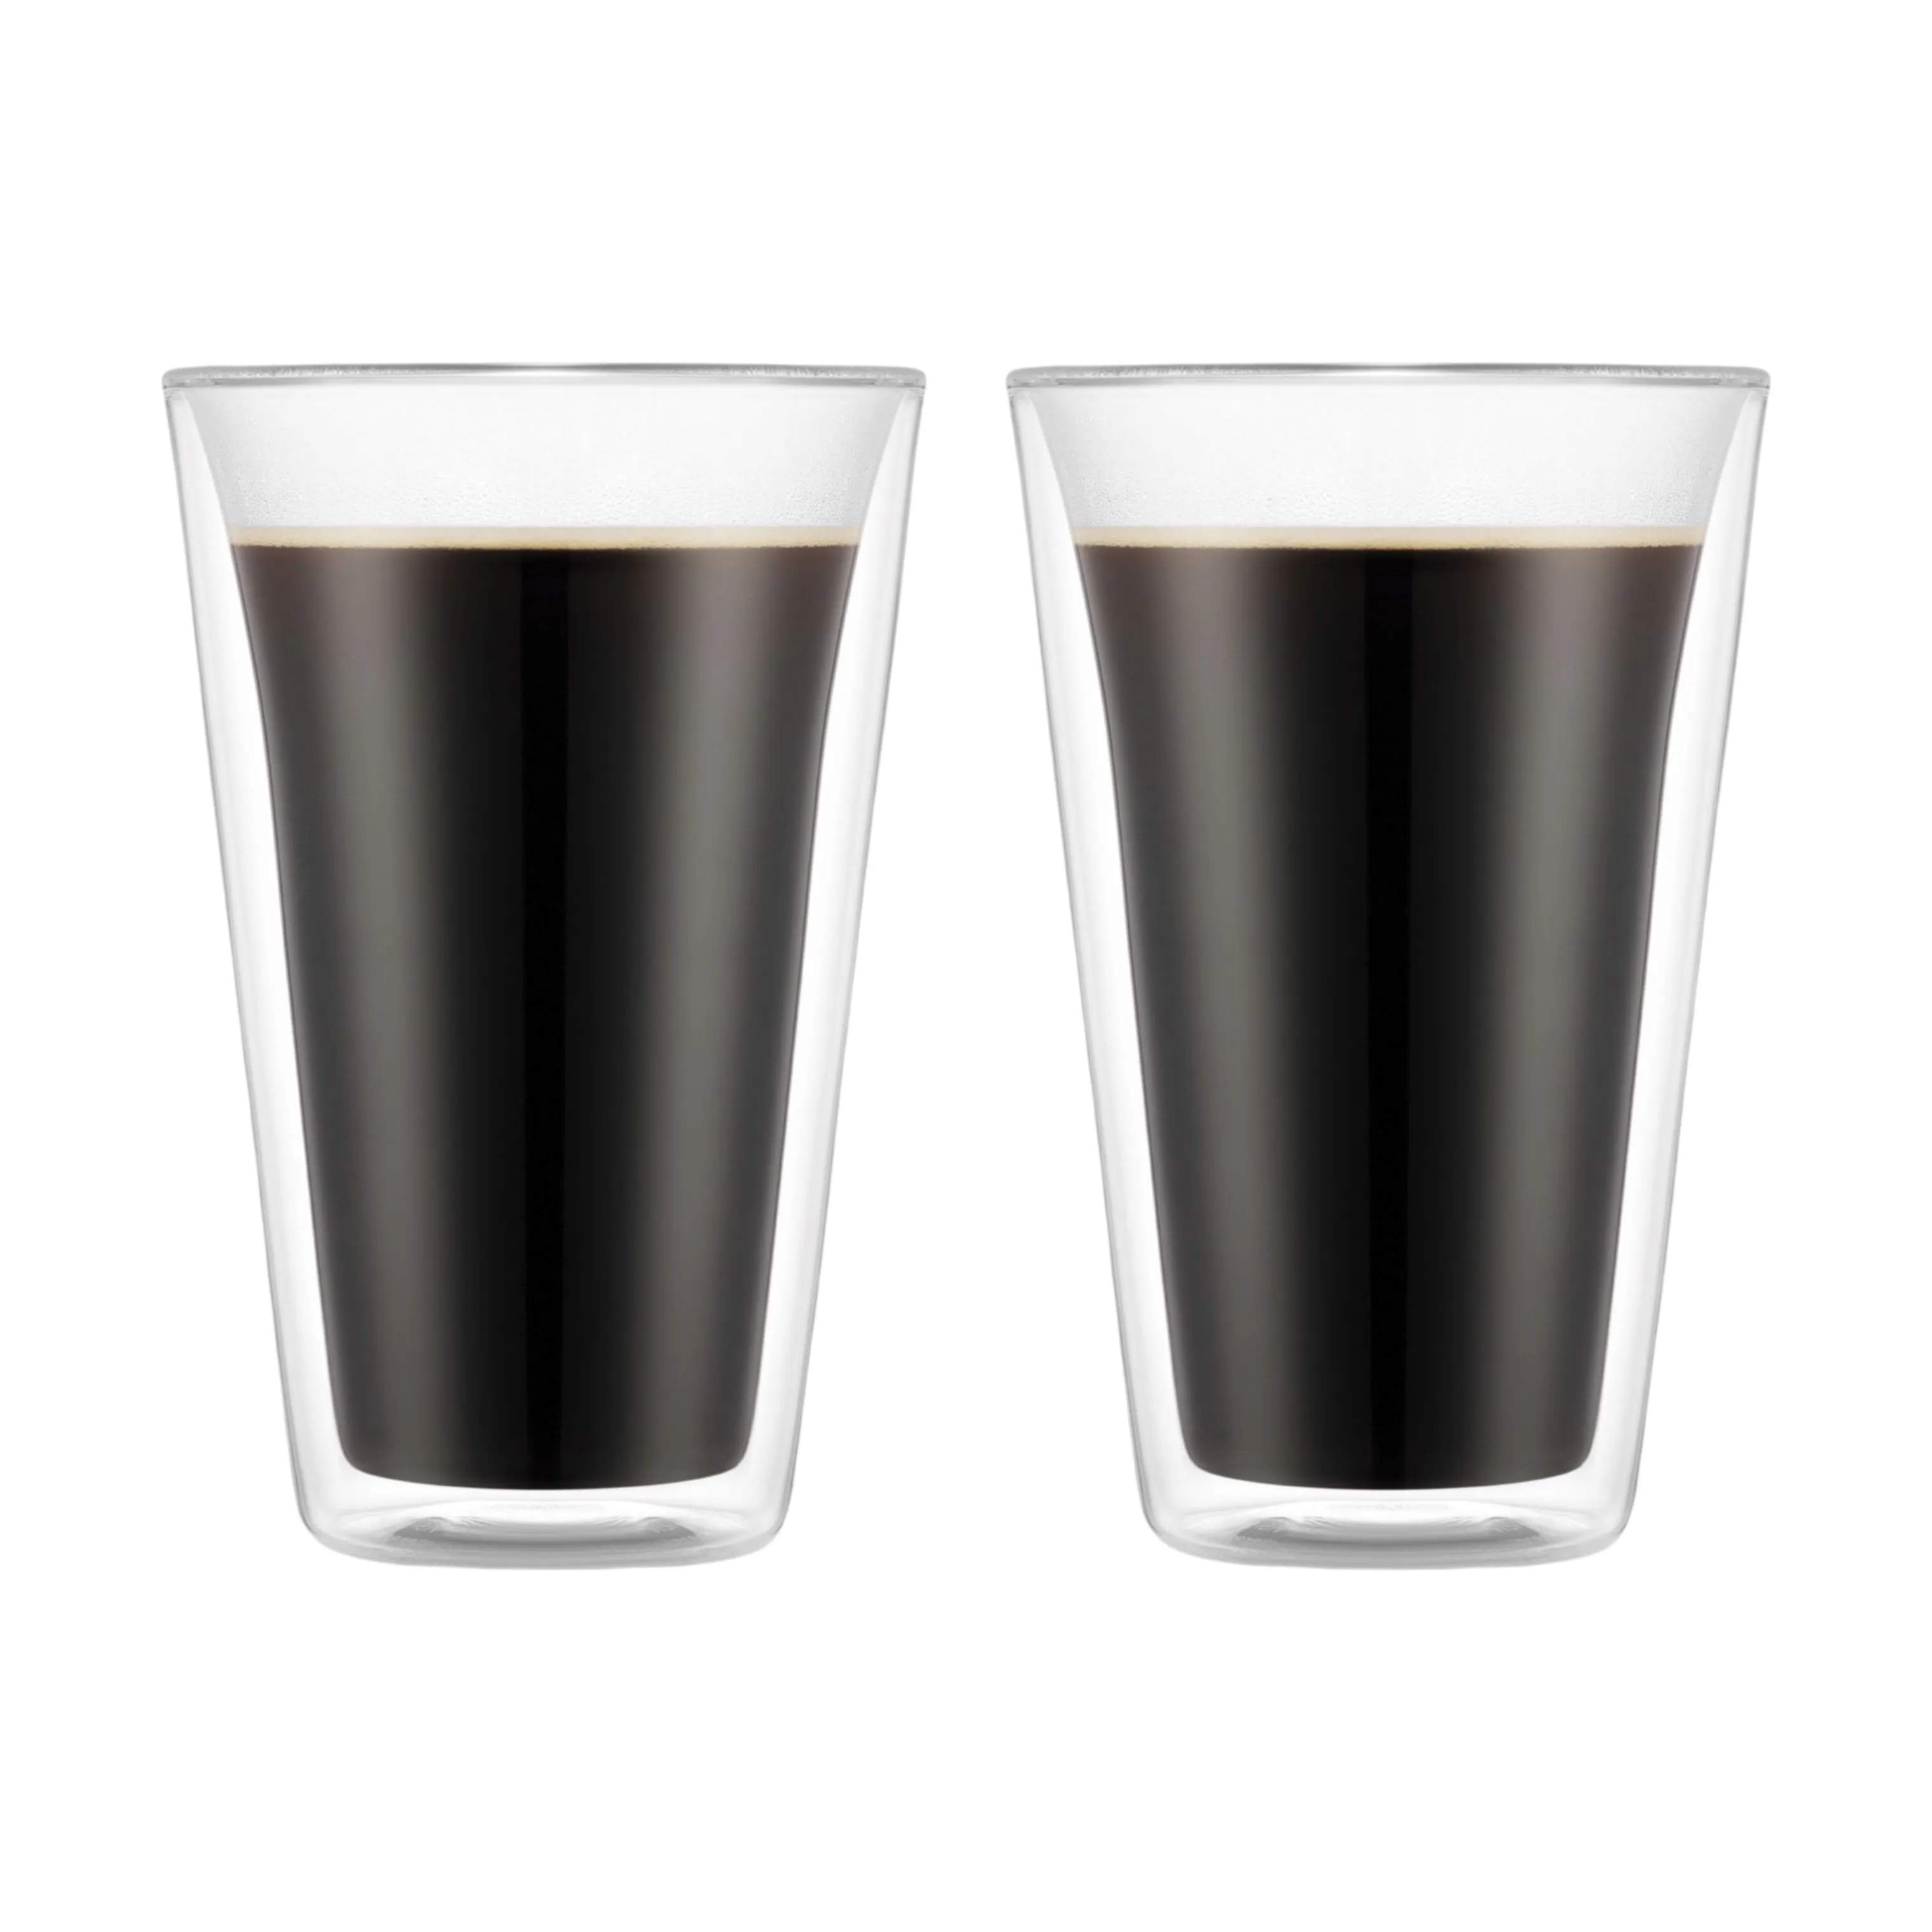 Canteen Glas - 2 stk., , large